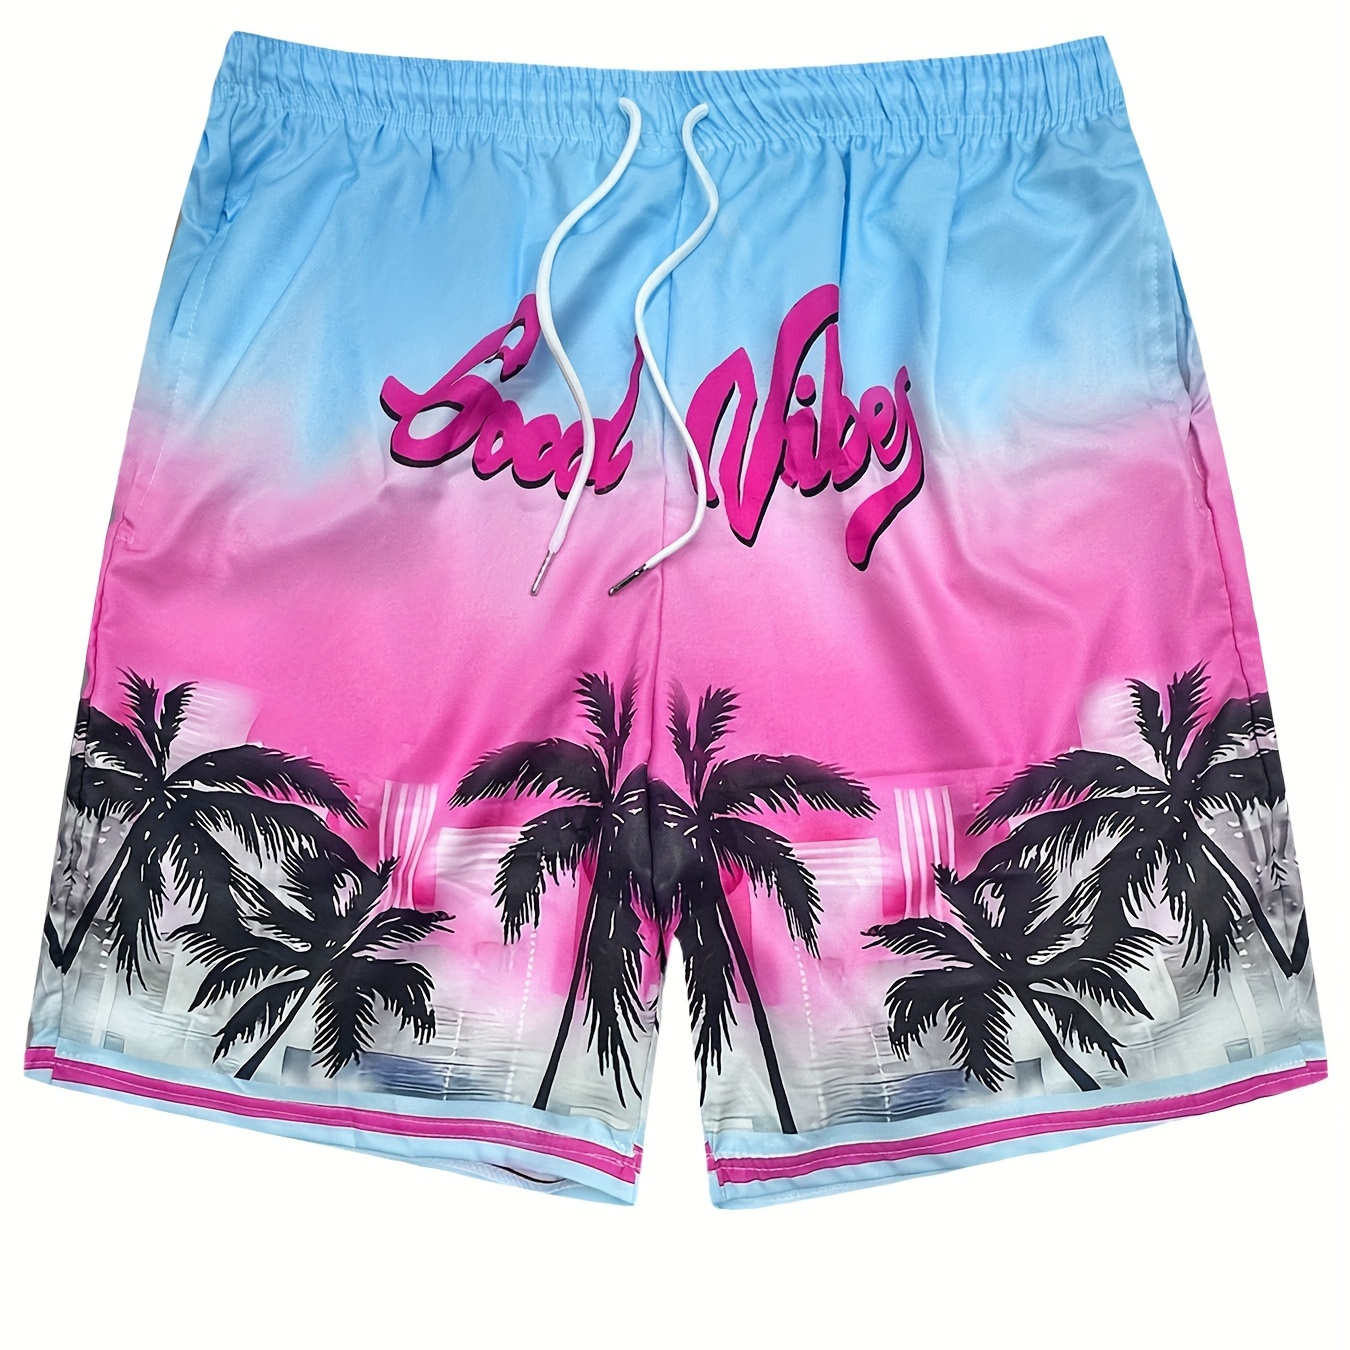 

Coconut Trees Pattern Print Men's Gradient Beach Shorts Activewear, Drawstring Quick Dry Shorts, Lightweight Shorts For Summer Holiday Beach Surfing